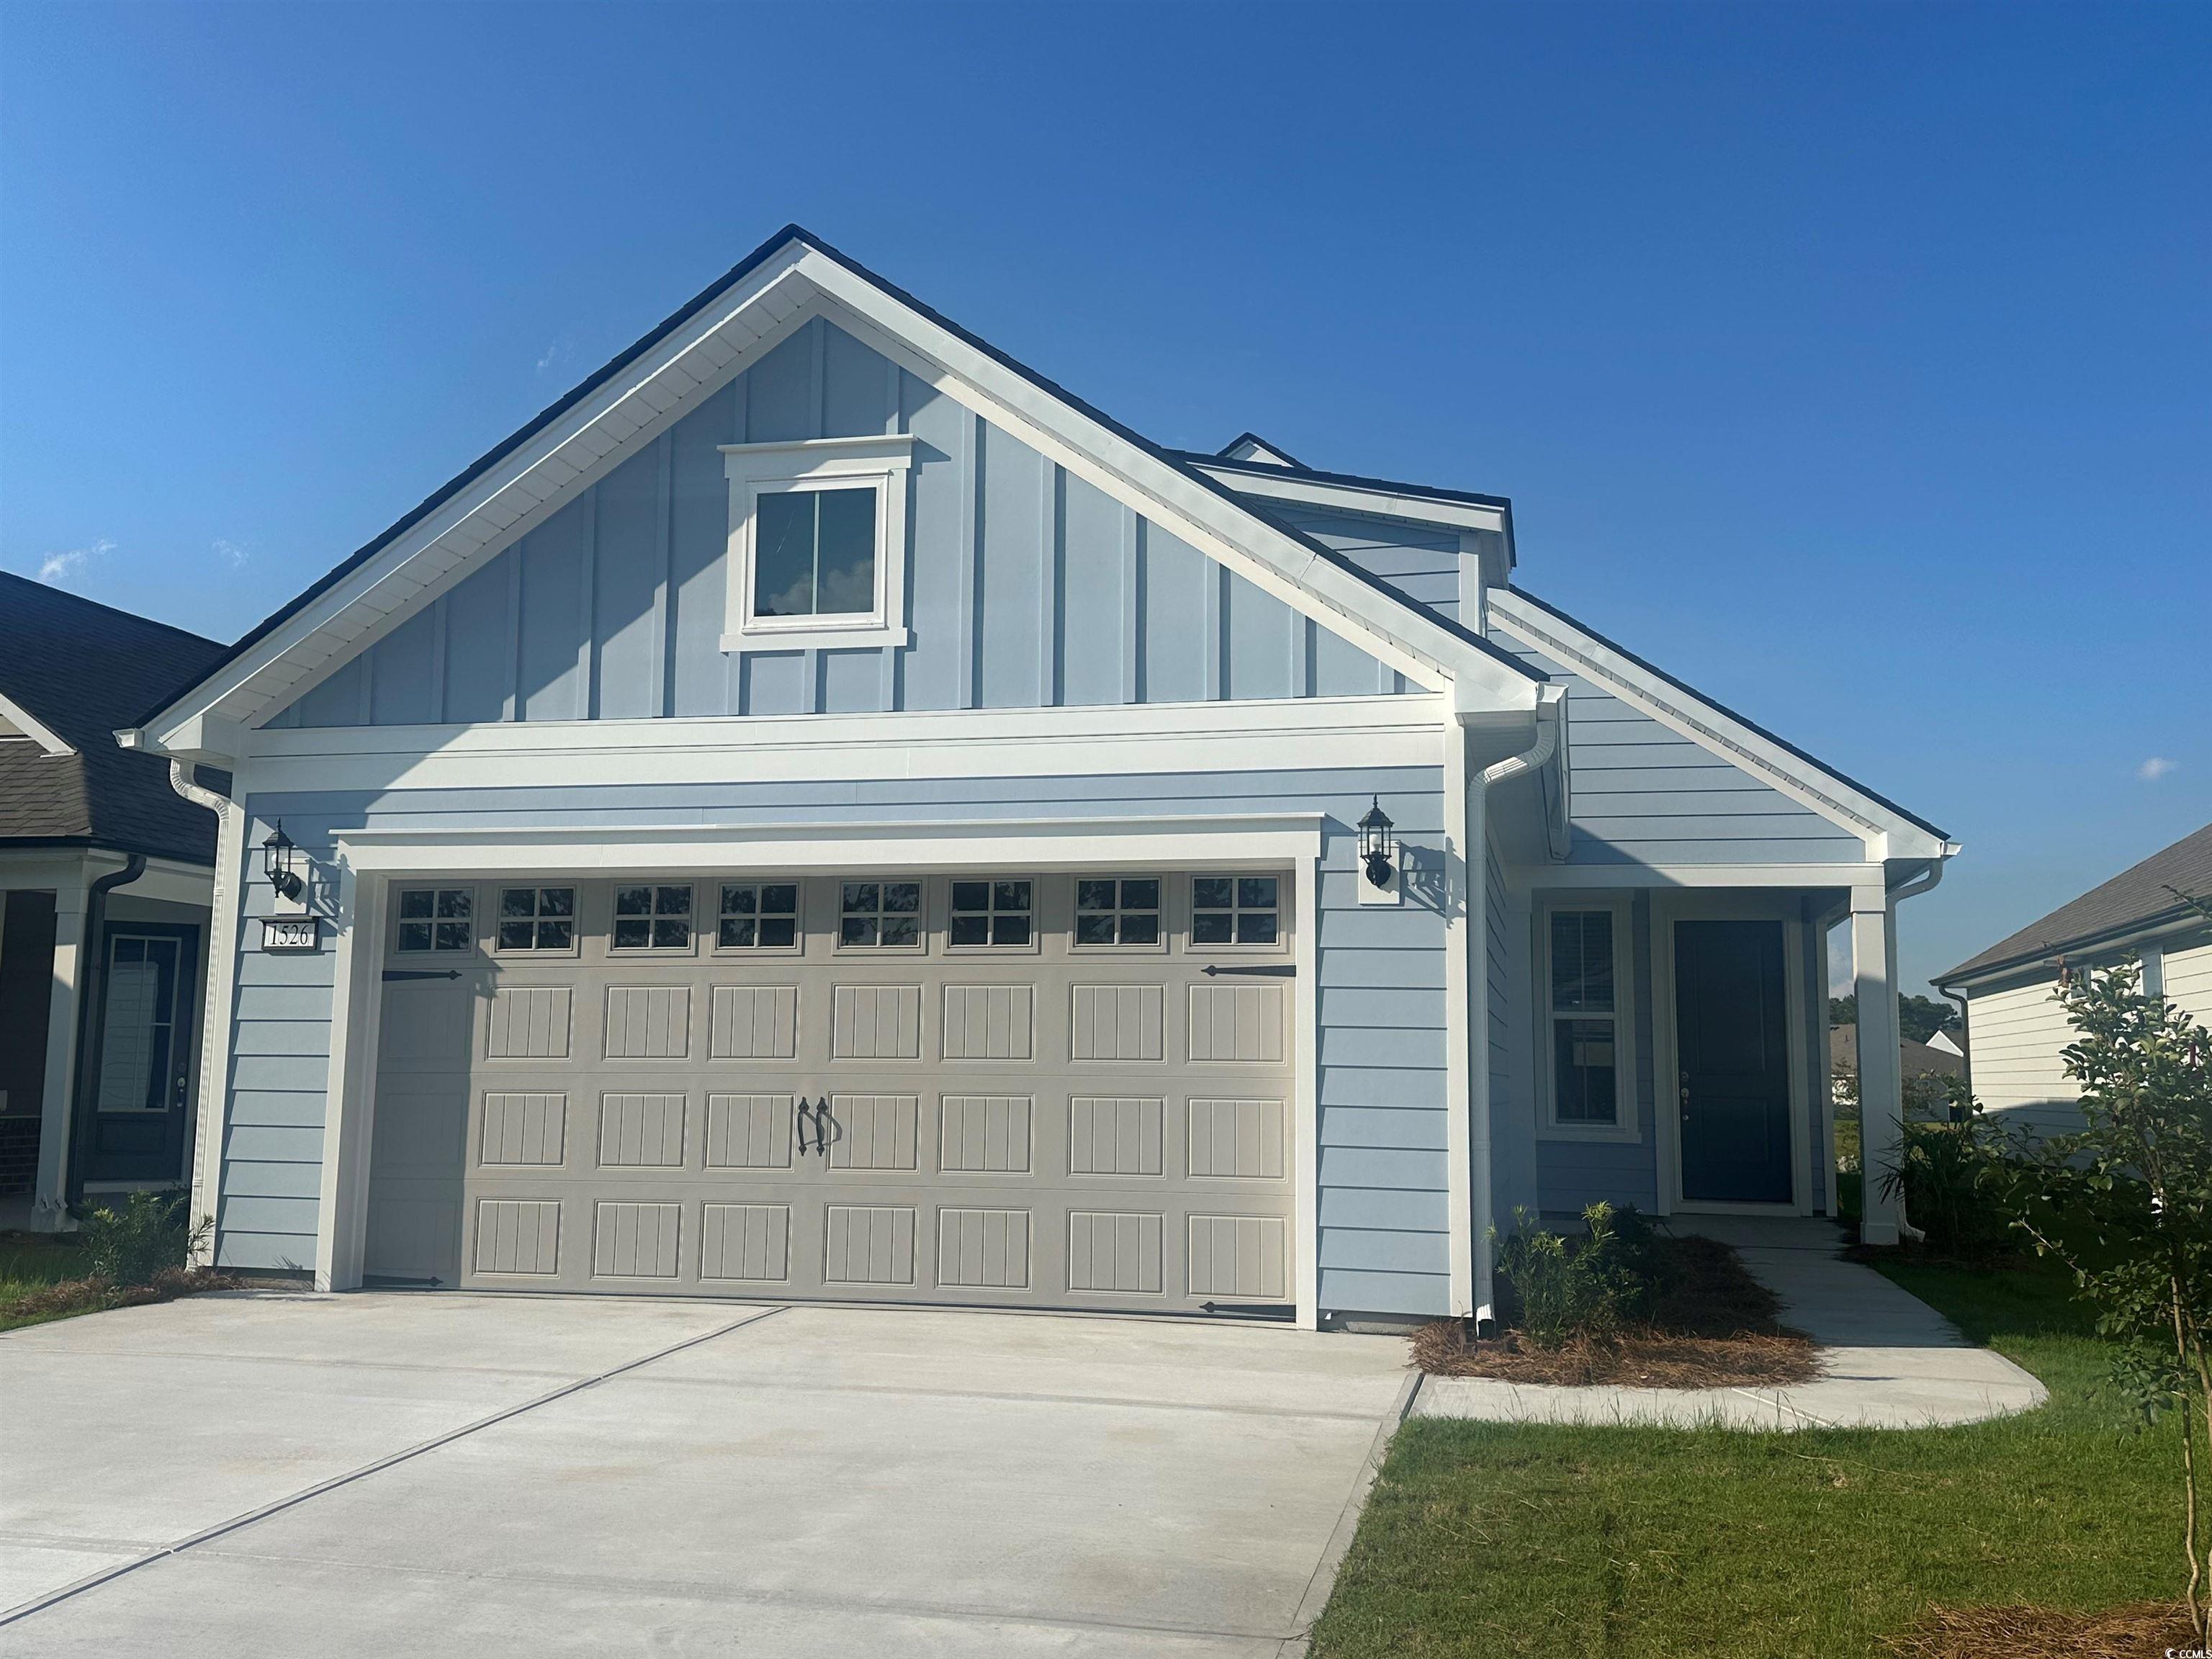 all new 55+ lifestyle community - selling now, ask about our quick, move-in ready homes.  age restricted, central north myrtle beach, just a mile from the ocean.  golf cart friendly, pets/fences allowed.  amenities/clubhouse, yard care, high-speed internet and cable included in monthly hoa.  < 500 homes upon completion, build to suit, choice of 10 customizable floorplans.  detached low-country, single-level floorplans, 2 - 4 bedroom homes with 2-3 car garage options.  monthly events/activity calendar provided by full-time lifestyle director, and amenity center/clubhouse scheduled to be completed summer 2023 and will include indoor lap pool, outdoor salt water pool/hot tub, 8 pickleball courts, fitness center, bocce courts, putting green and 5 foot sidewalks both sides of the street throughout the community! < 5 minutes to city community center, sports complex, aquatics & fitness center and crescent beach public beach access.  dog park, marinas, rv parks/storage, golf courses, dining, grocery, medical facilities and more within 15 minutes.   myrtle beach international airport < 30 minutes away!  you cannot beat this location!